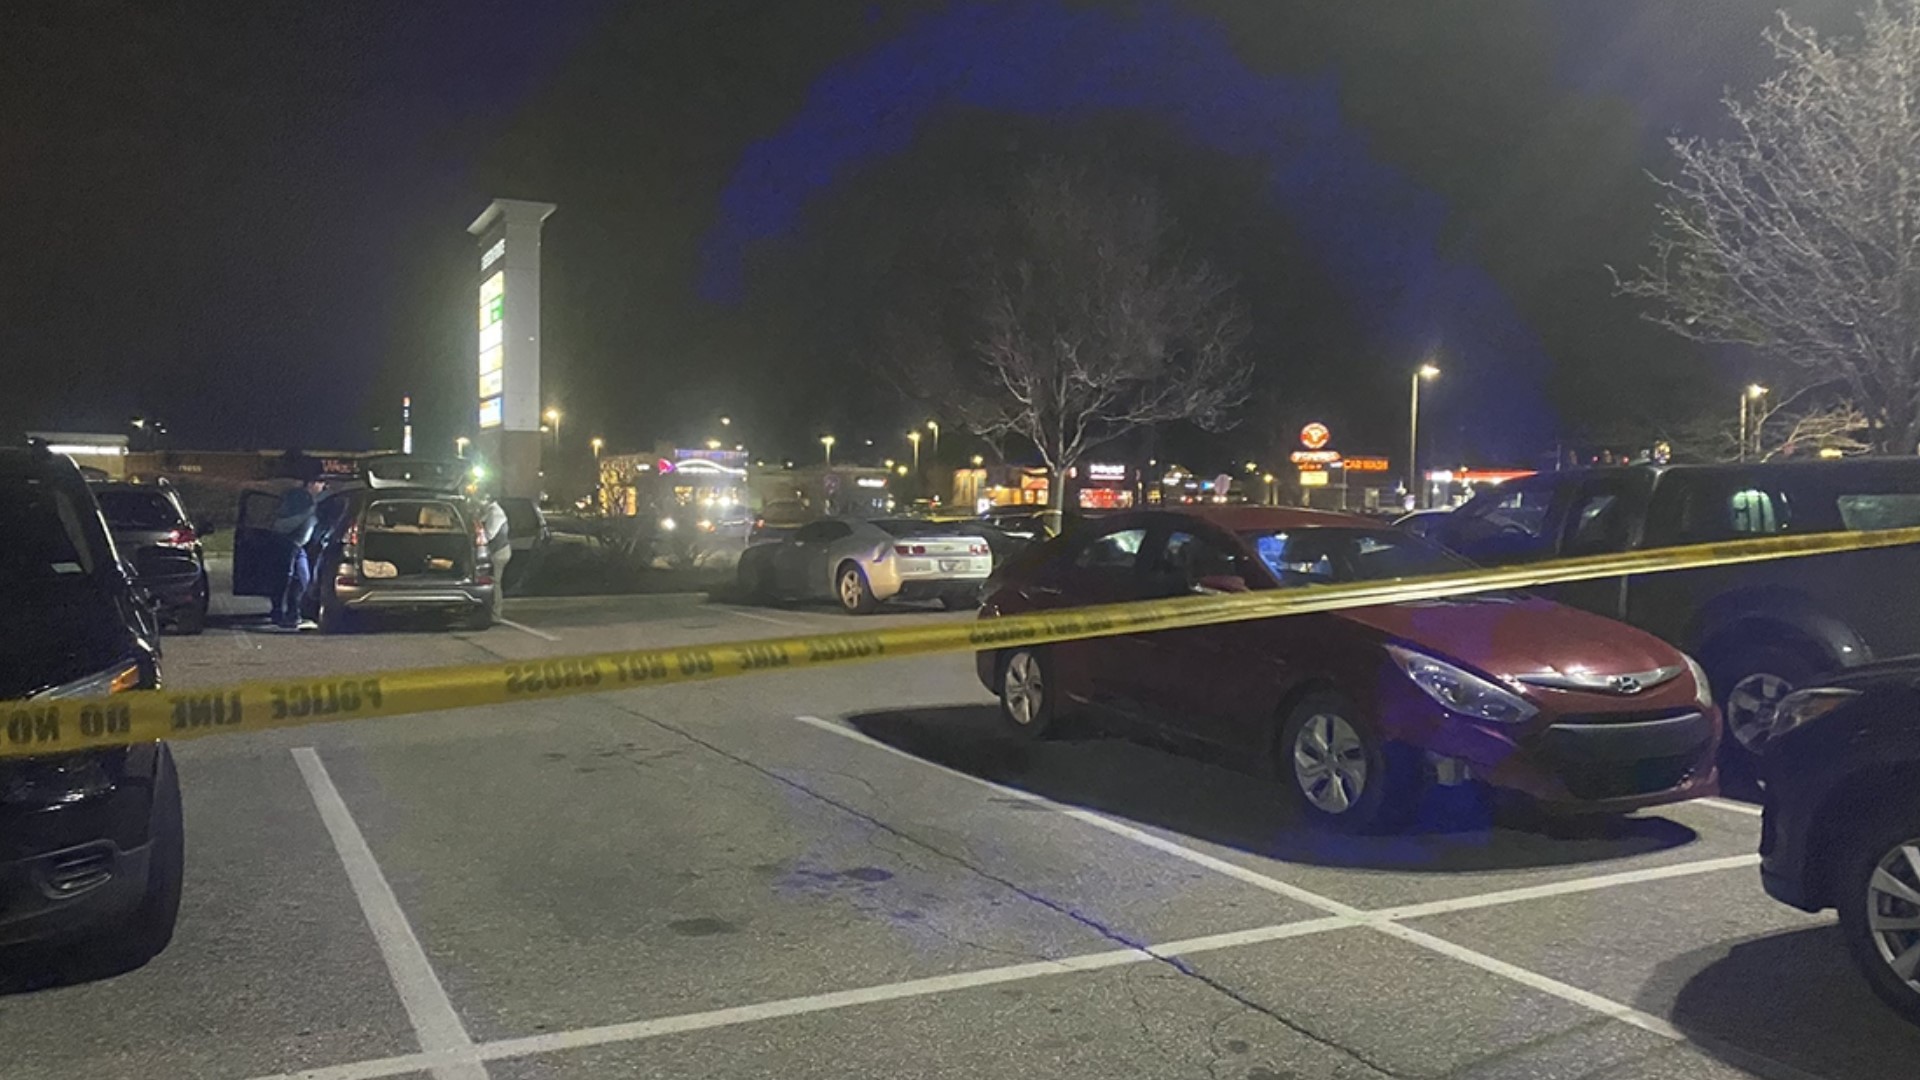 Marco Antonio Gonzalez, 25, is accused of the March 8 murder of 52-year-old Timothy A. Sannito, of Indianapolis, in the Ale Emporium parking lot.